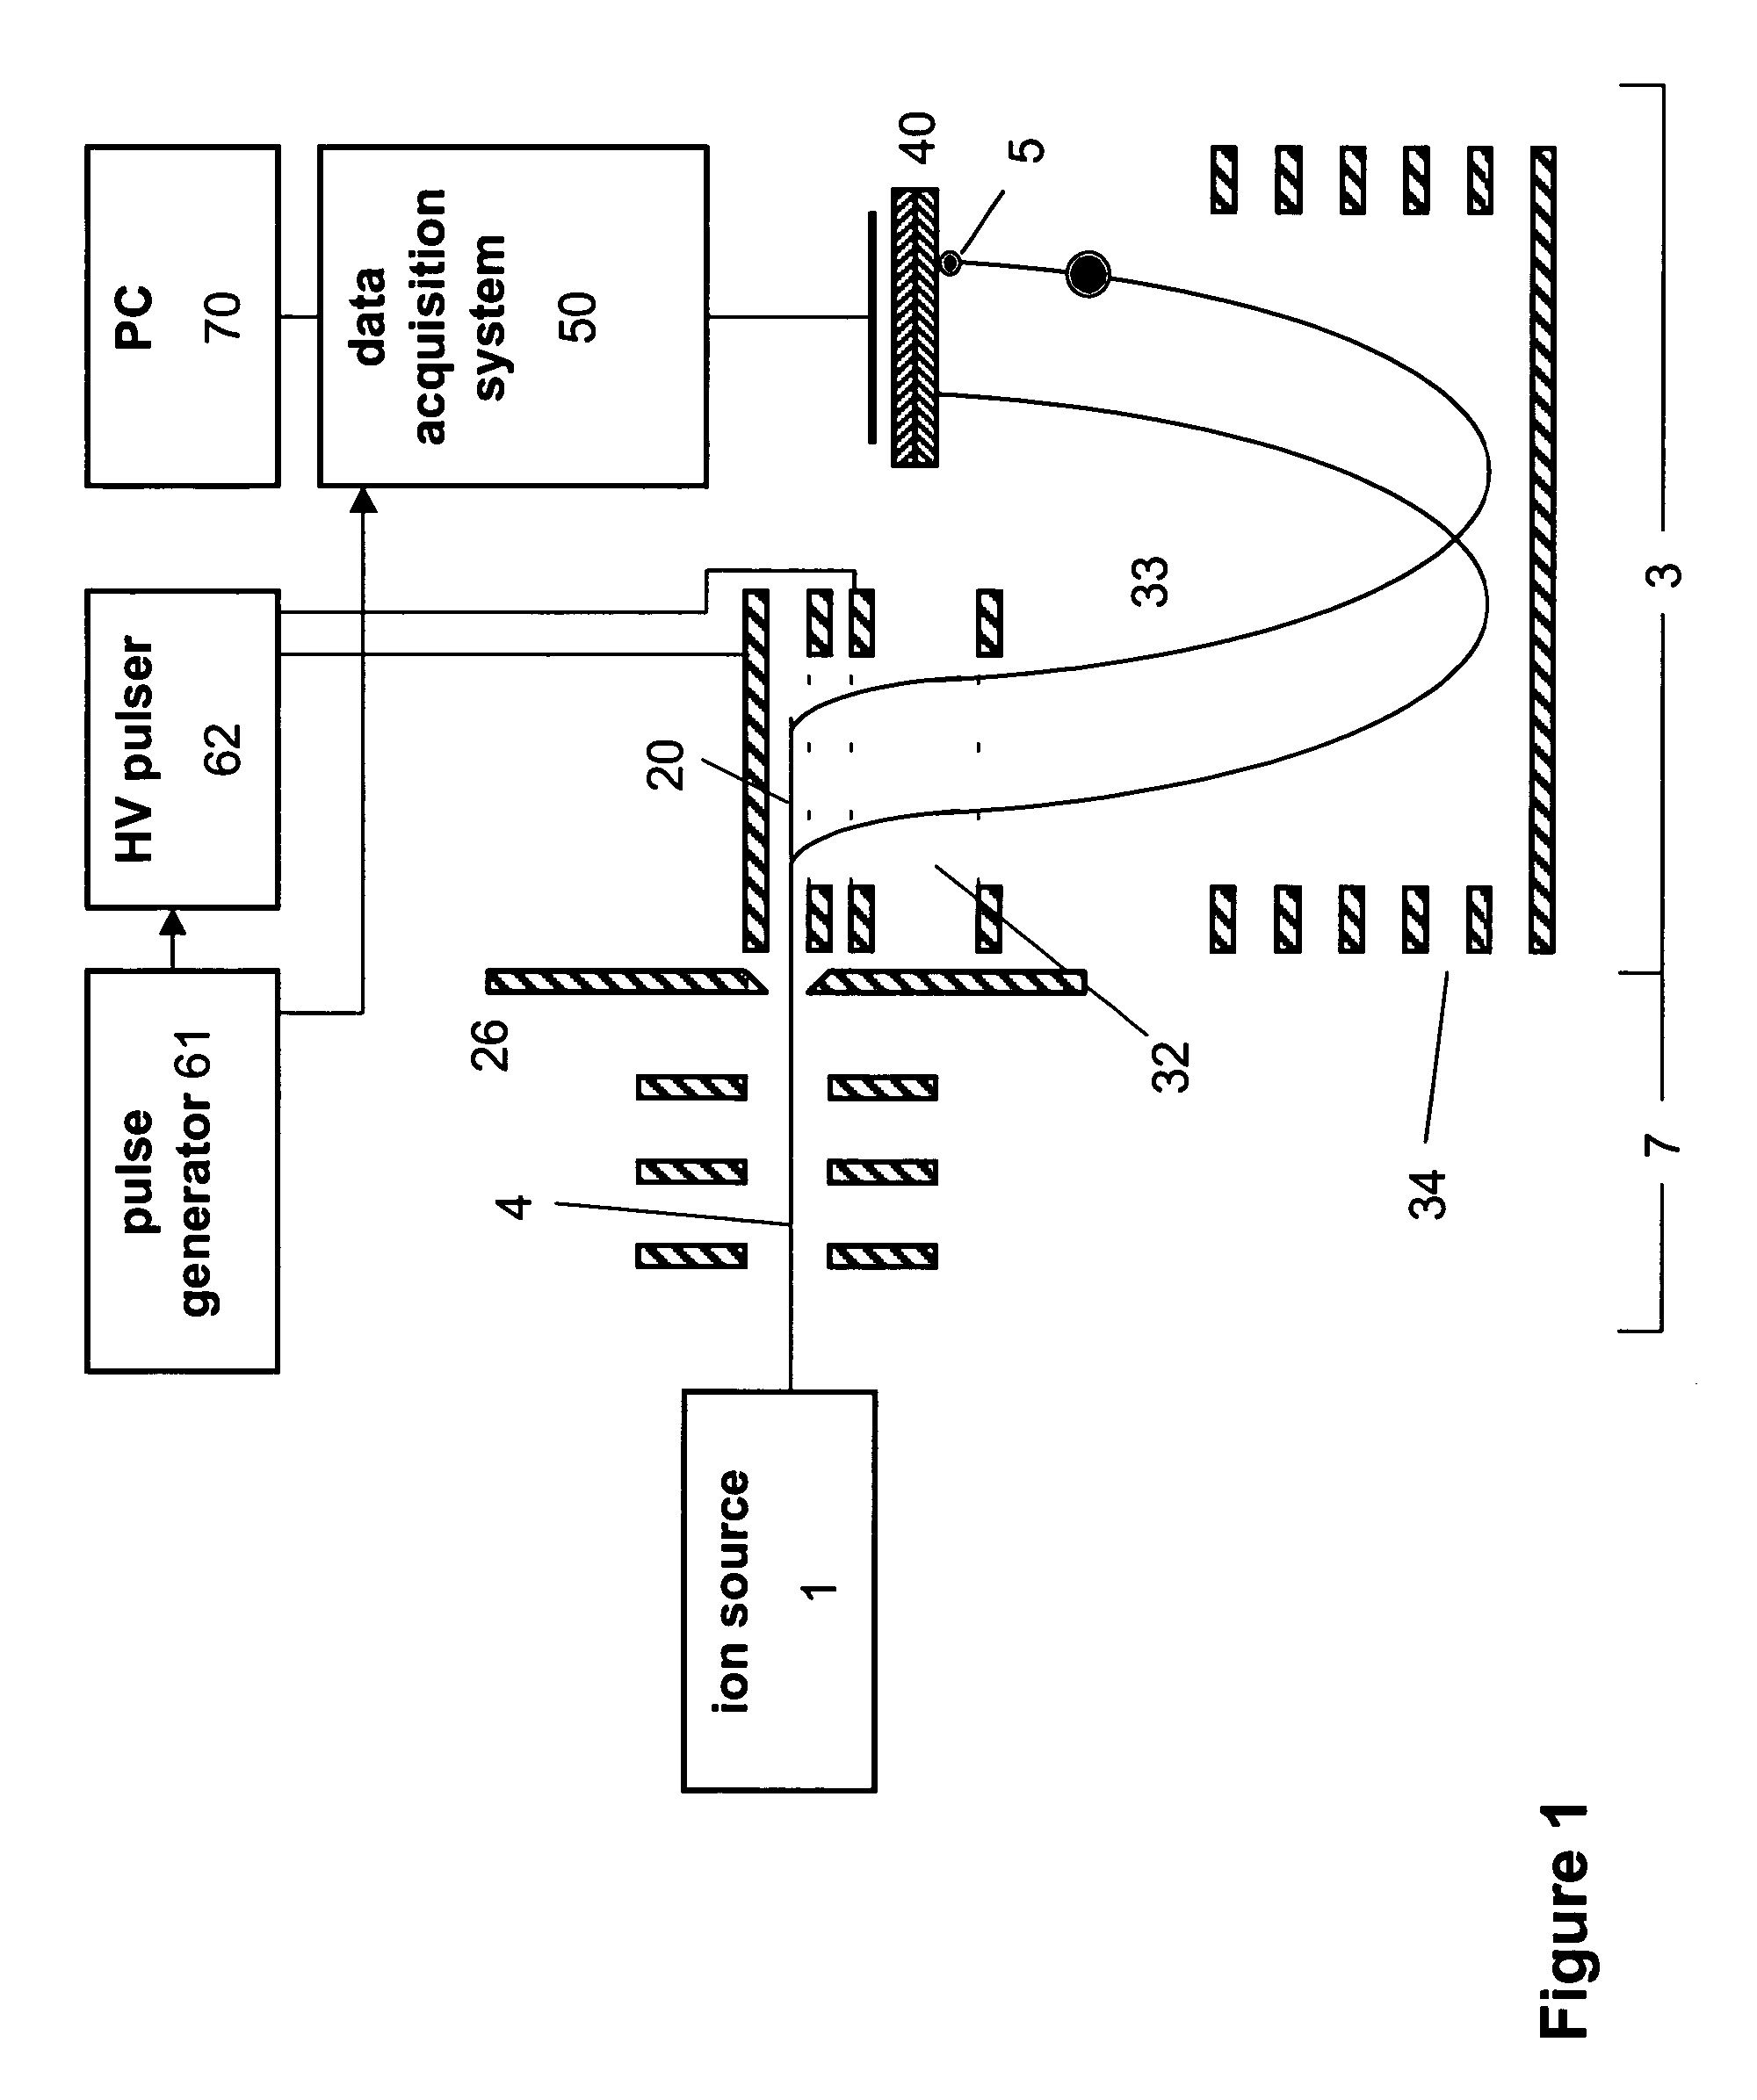 Fast time-of-flight mass spectrometer with improved data acquisition system